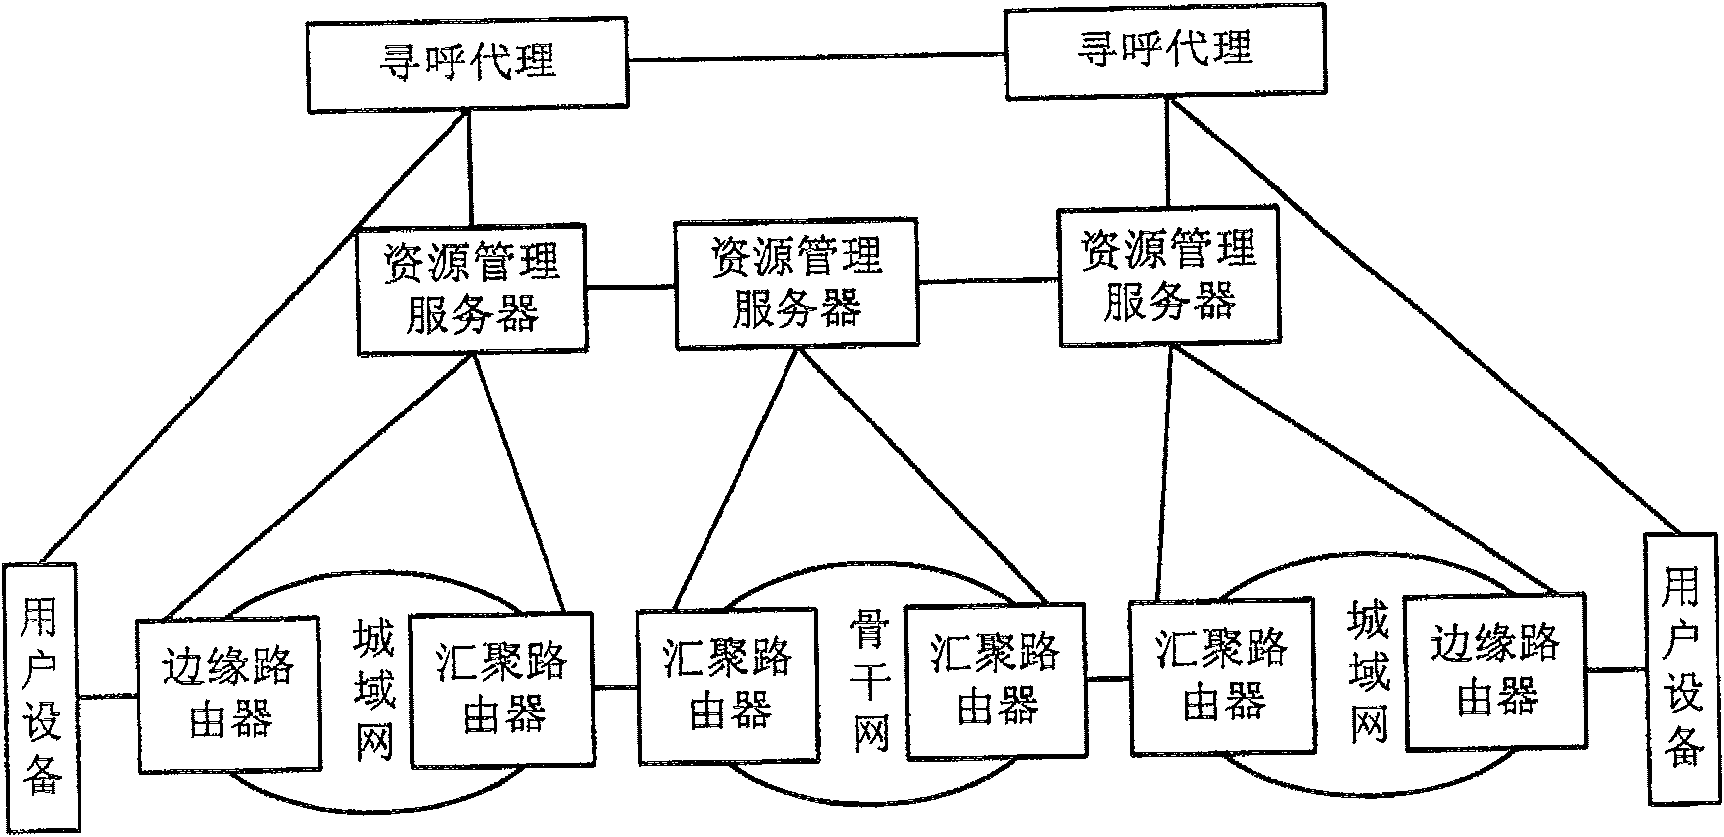 A network service issuing system and its control method of issuing service